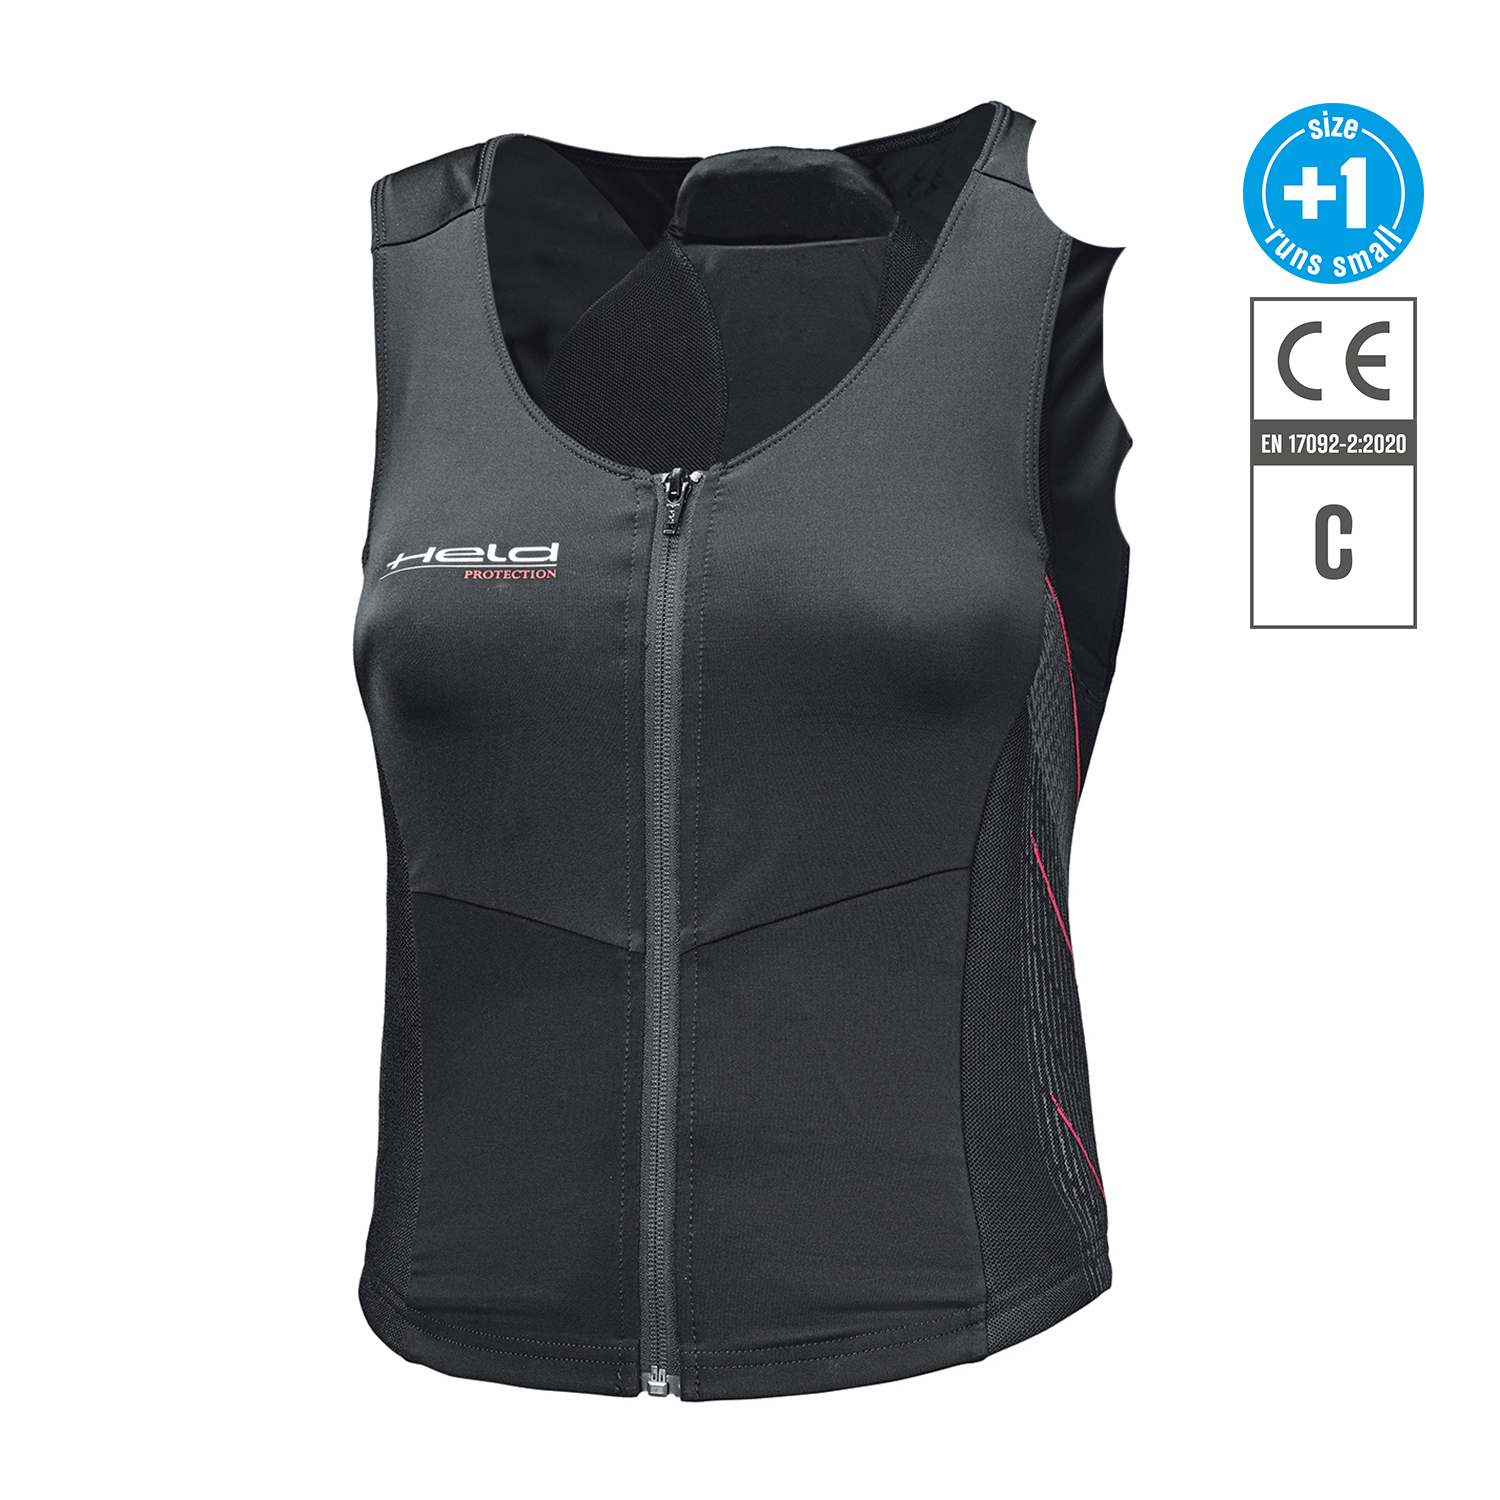 Held Nagato Vest Womens - Available in Various Sizes